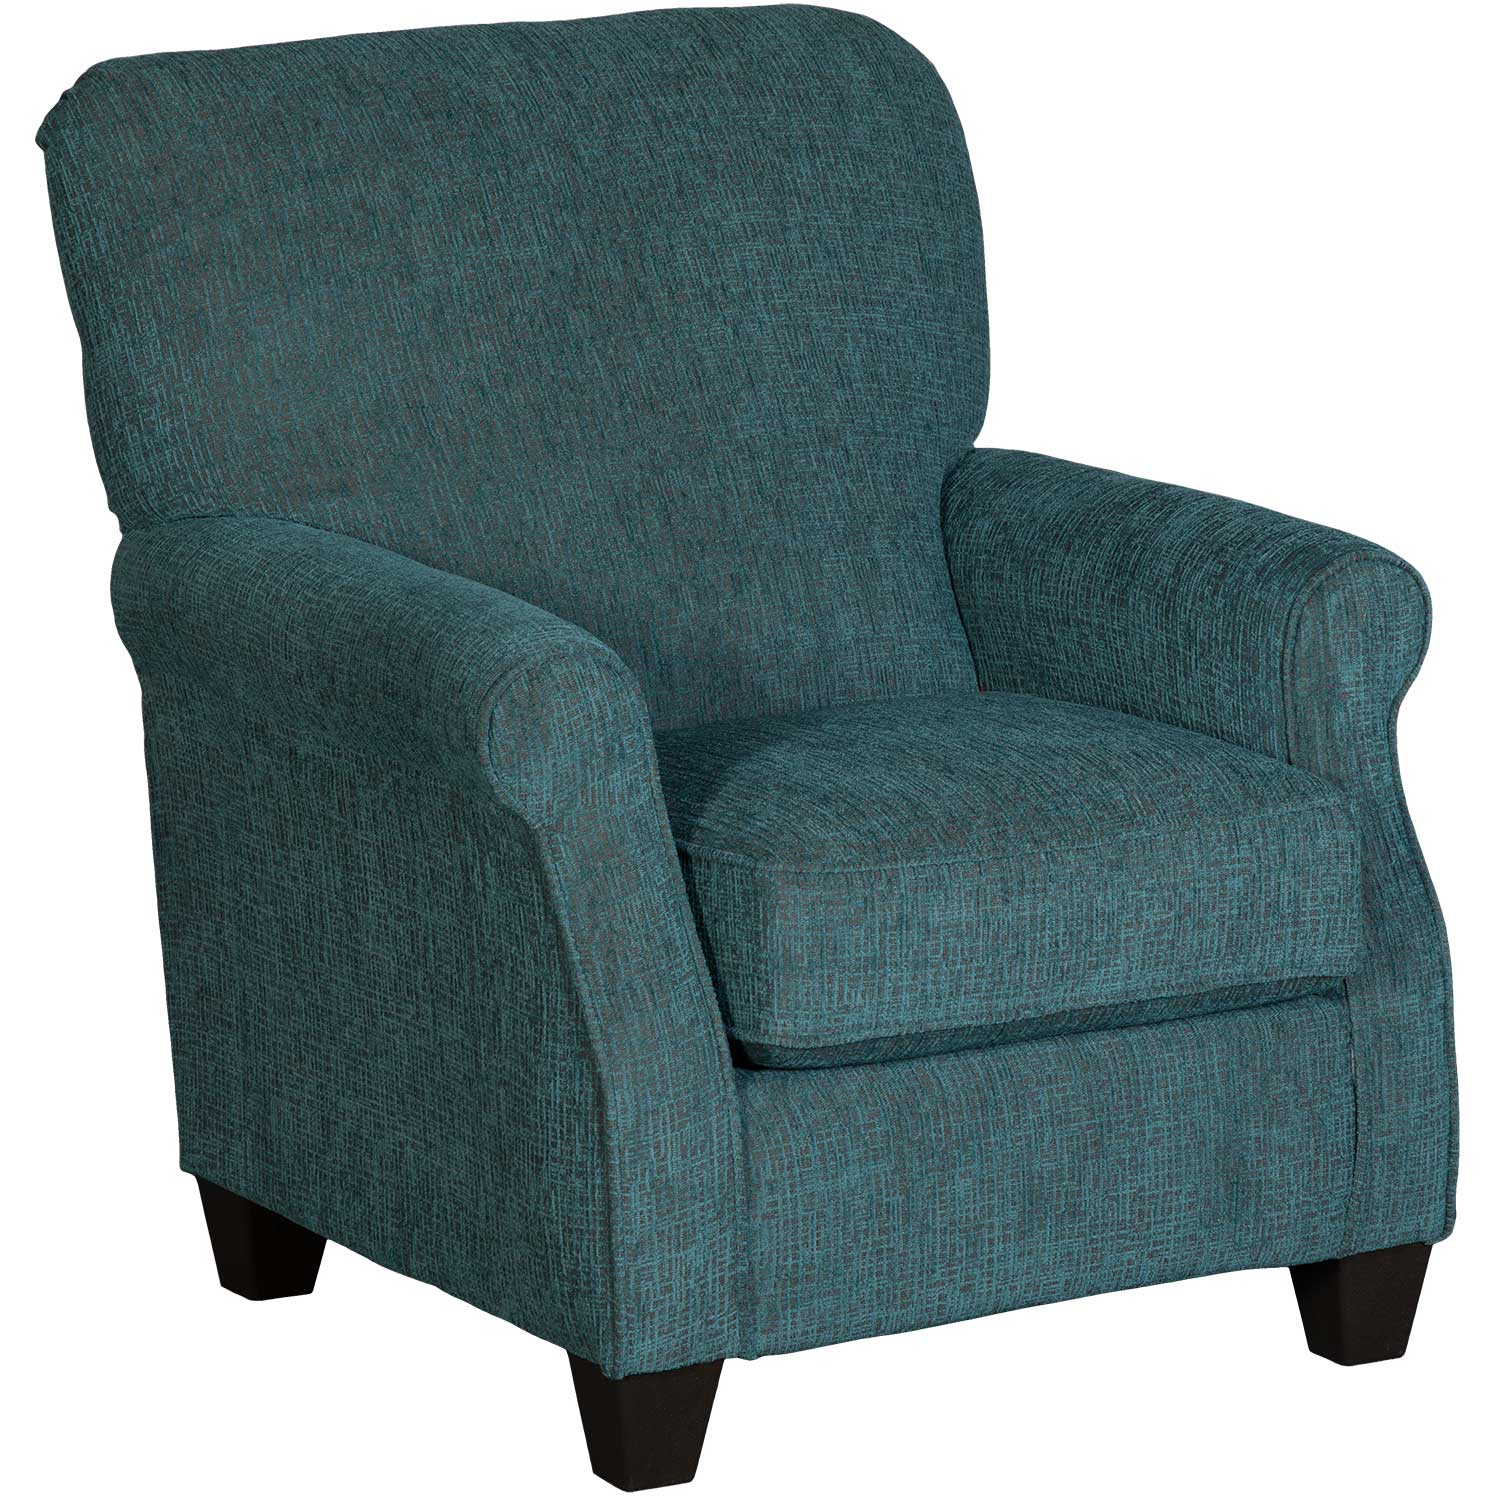 Perth Teal Accent Chair | ZZ4-1030 | AFW.com